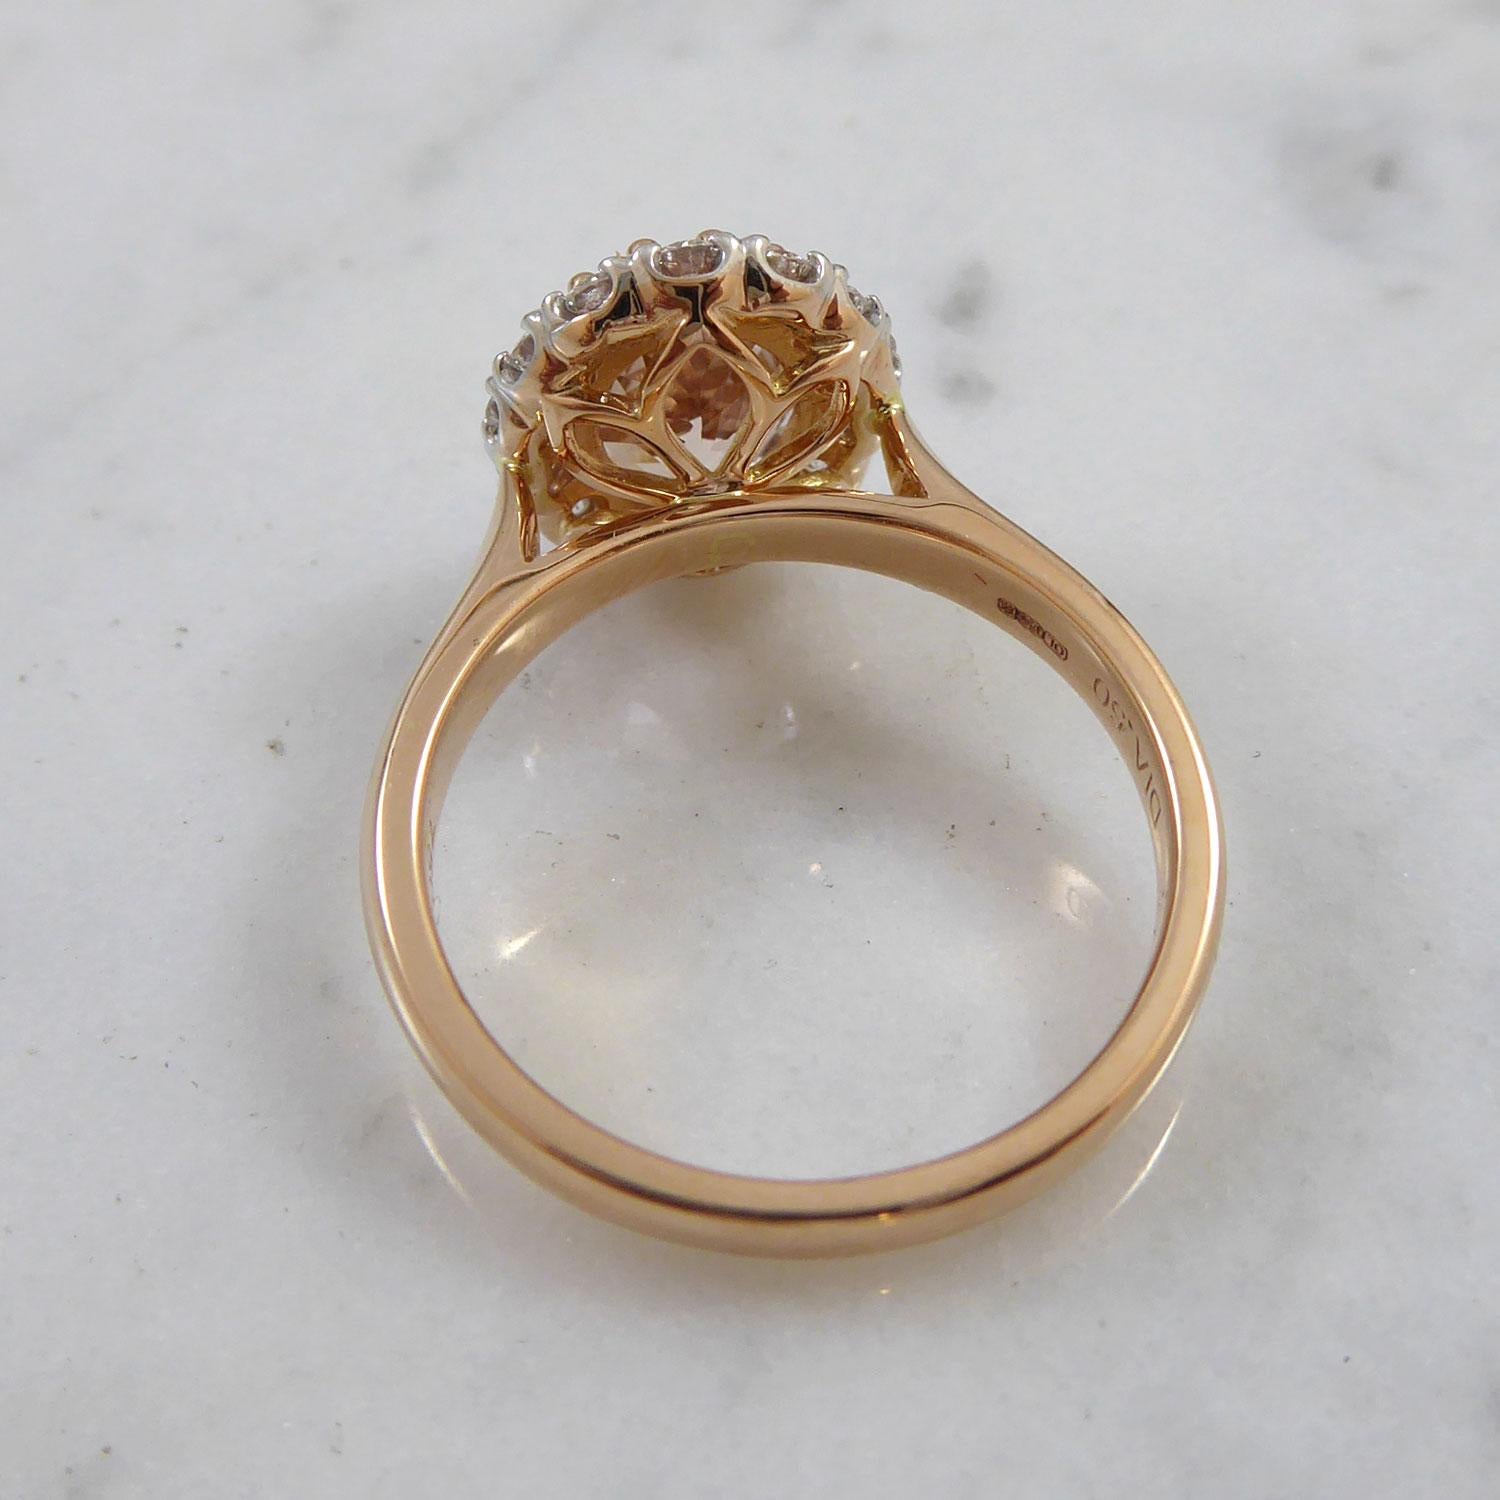 Women's 1.70 Carat Morganite and Diamond Ring, Vintage Cluster Style in Rose Gold